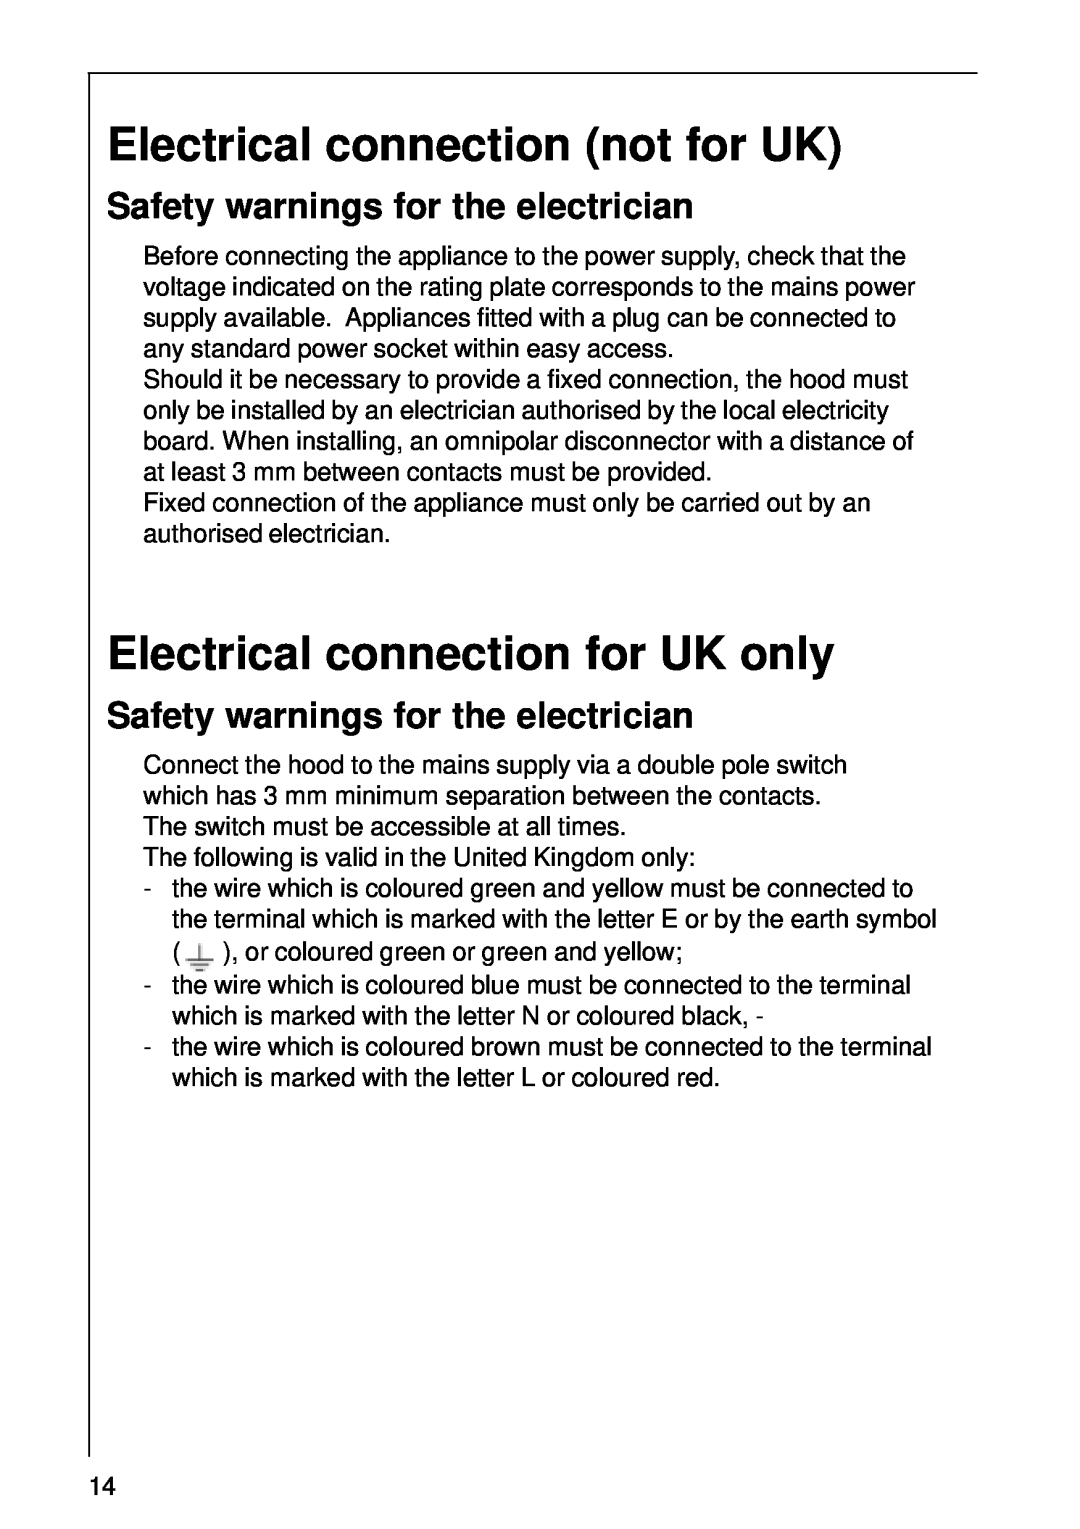 AEG 8361 D Electrical connection not for UK, Electrical connection for UK only, Safety warnings for the electrician 